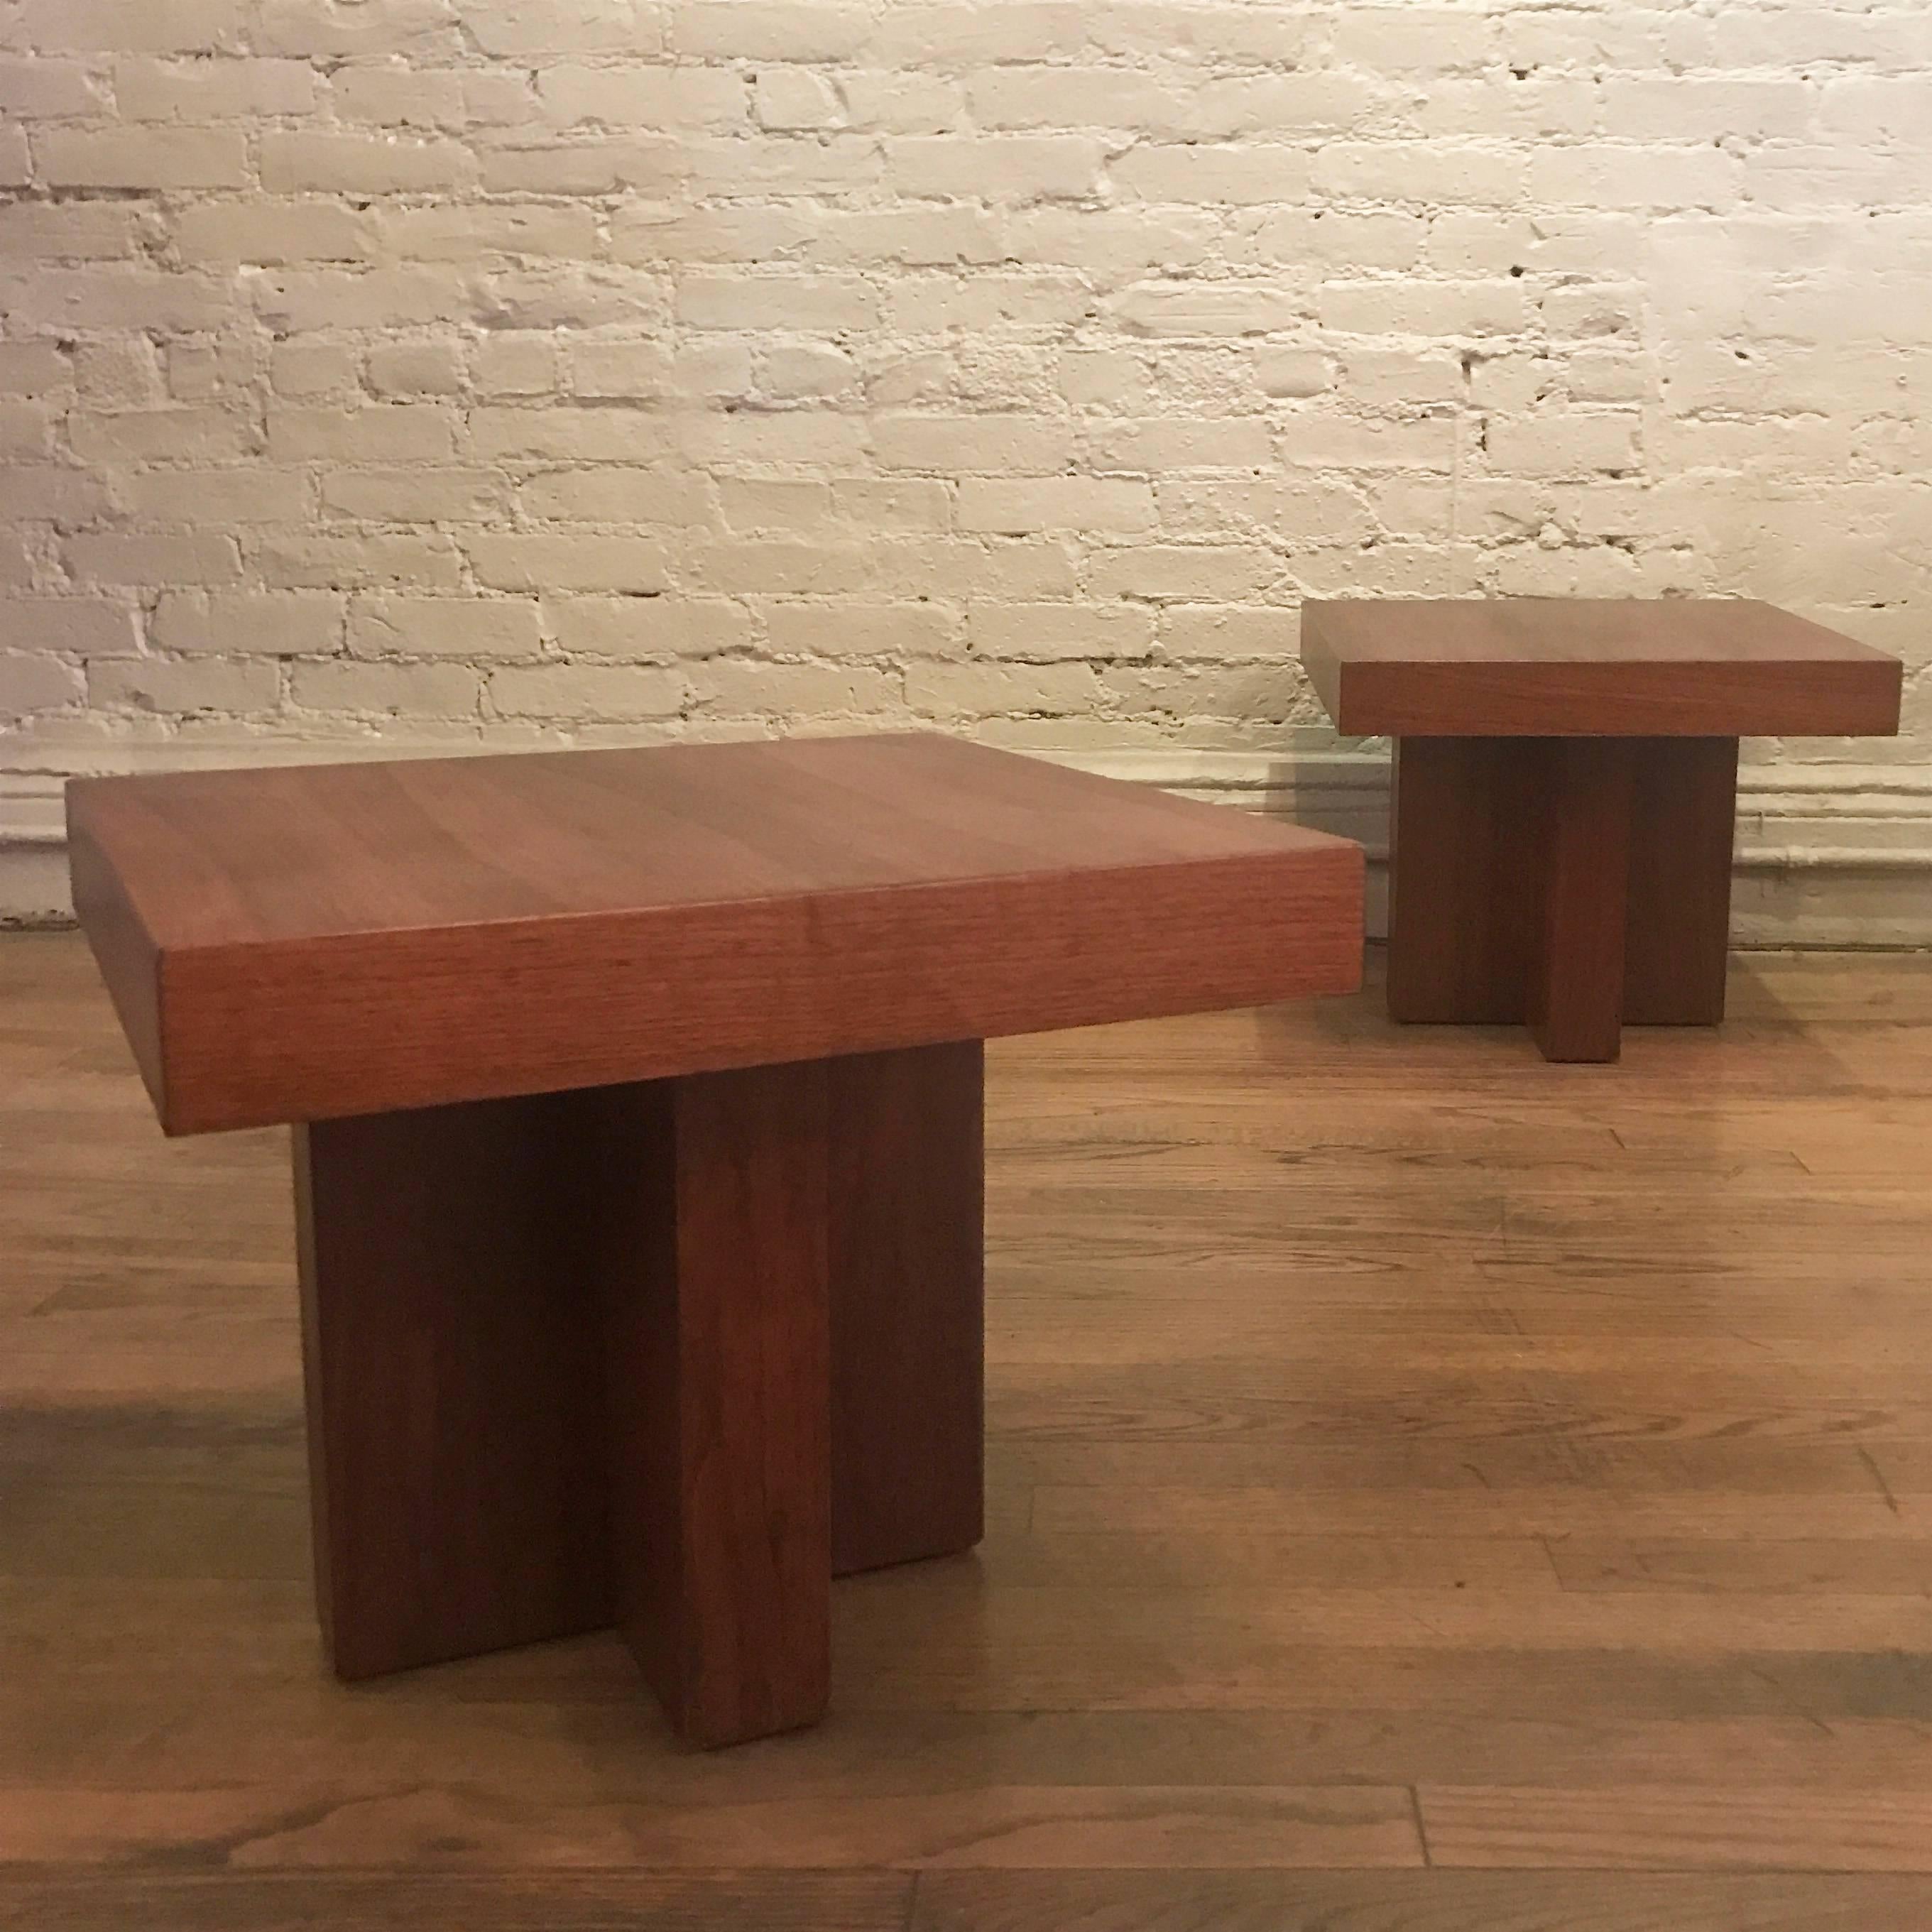 Pair of Milo Baughman, Model 1922, walnut, side tables feature incredibly proportioned 2.5″ thick X bases with 2.5″ thick tops. The tables can also be used together as a coffee table.